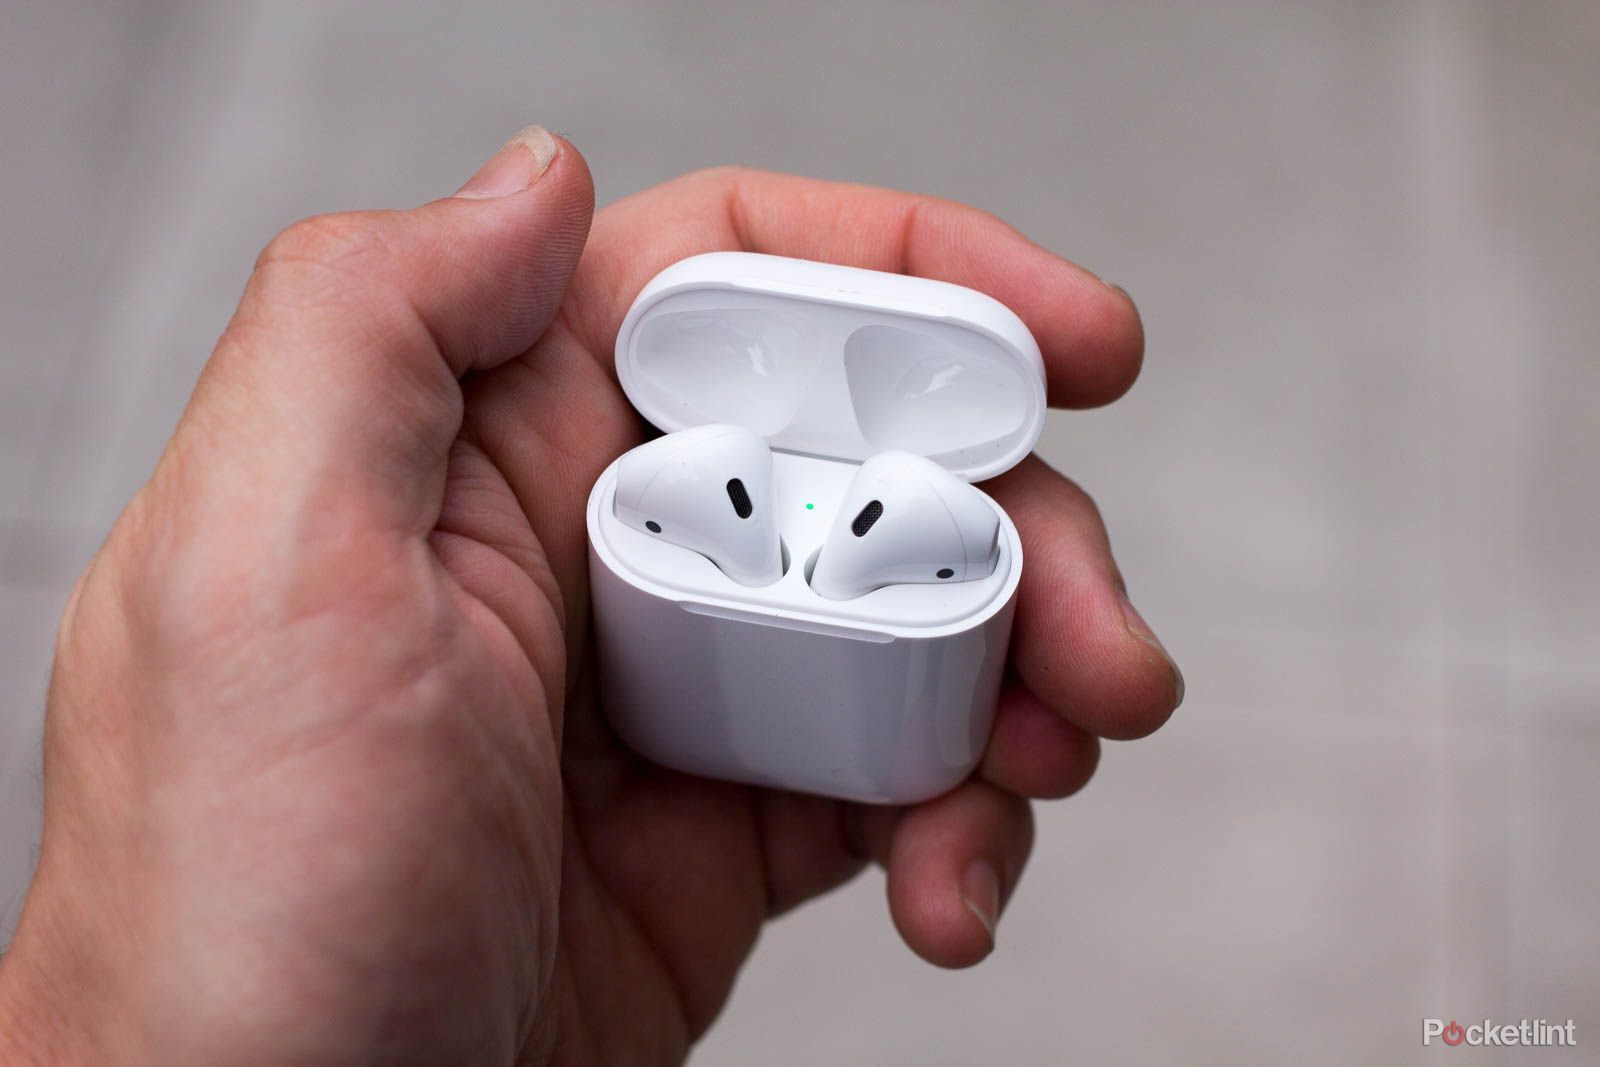 The new AirPods will feature hands-free Hey Siri image 1